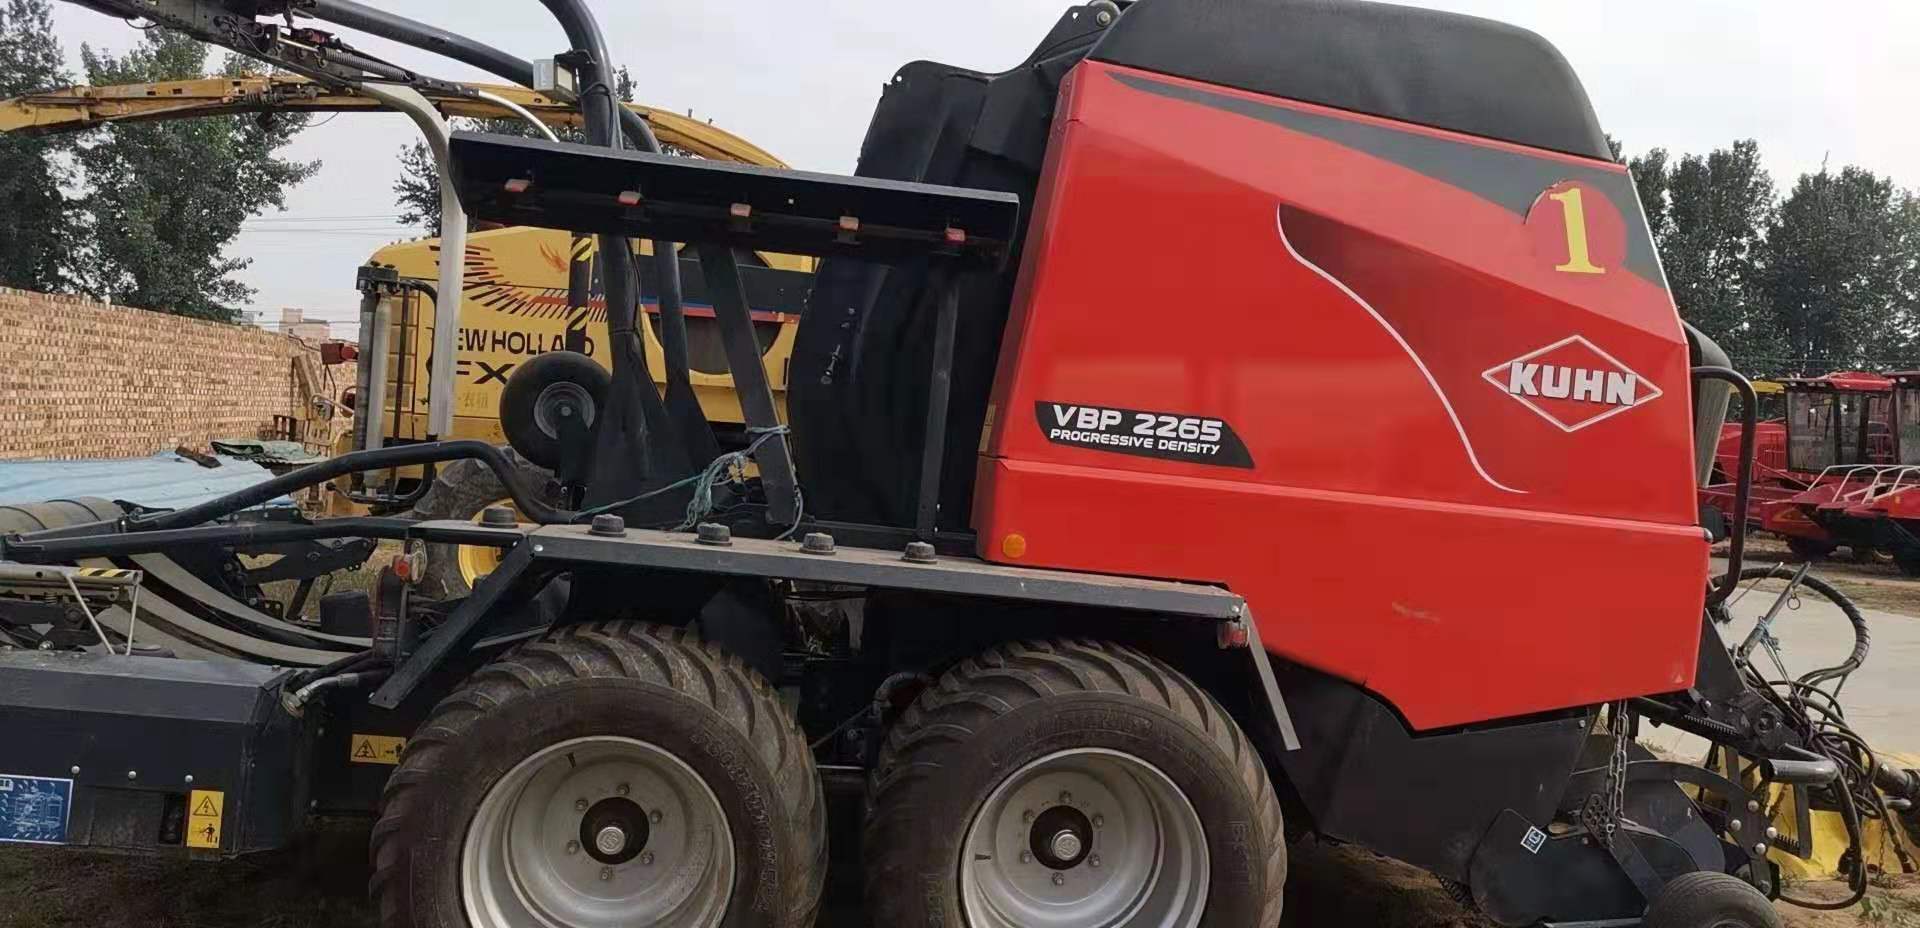 2018 Year almost New machine of Kuhn VBP 2265 baler and wrapping for sale(图7)